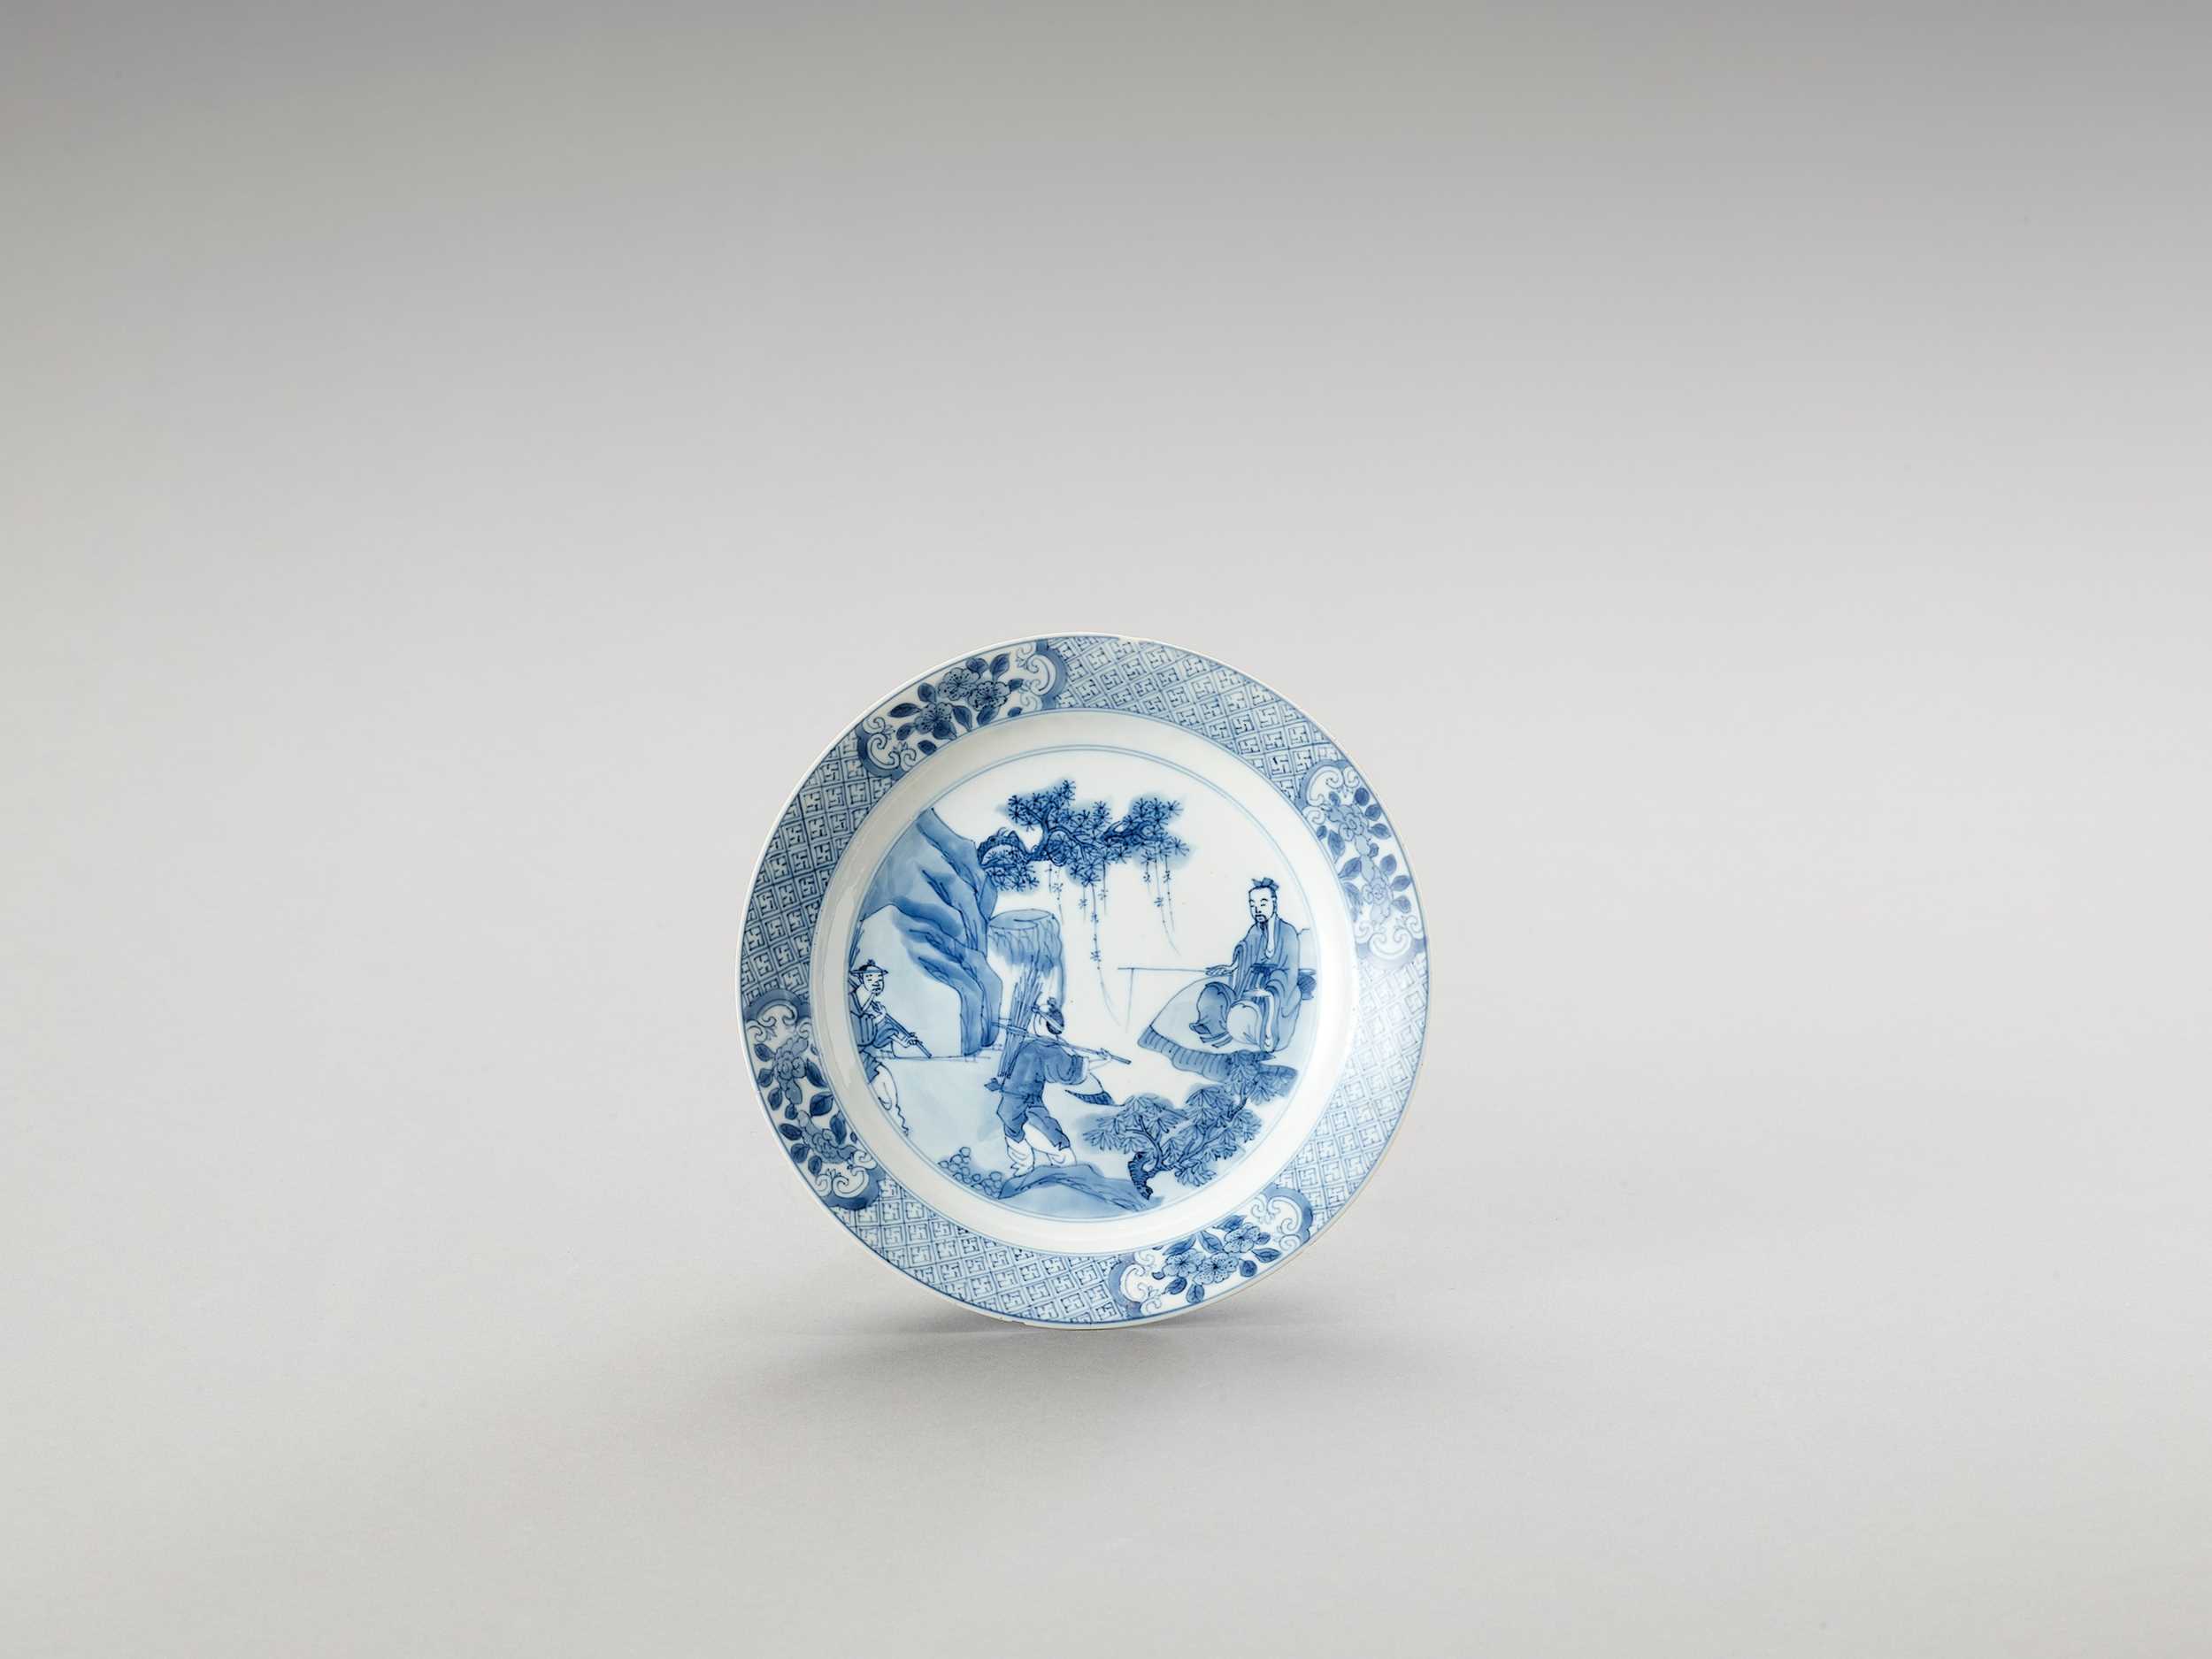 Lot 1108 - A BLUE AND WHITE PORCELAIN DISH